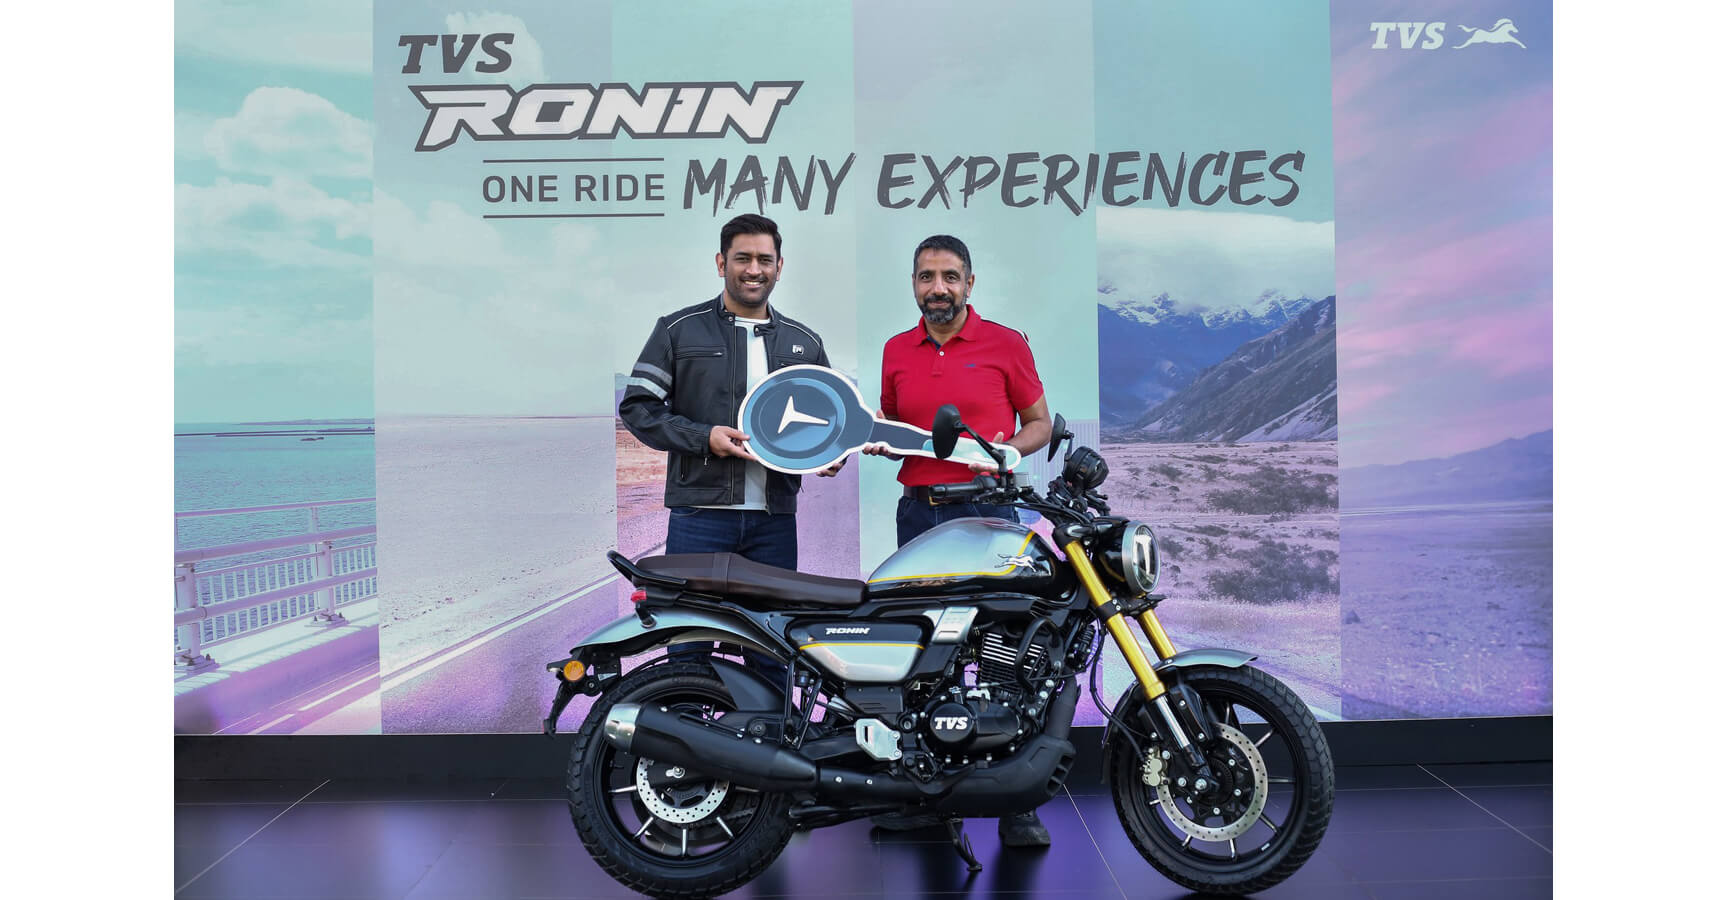 MS Dhoni Buy brand new TVS Ronin Worth Rs 1.71 lakh